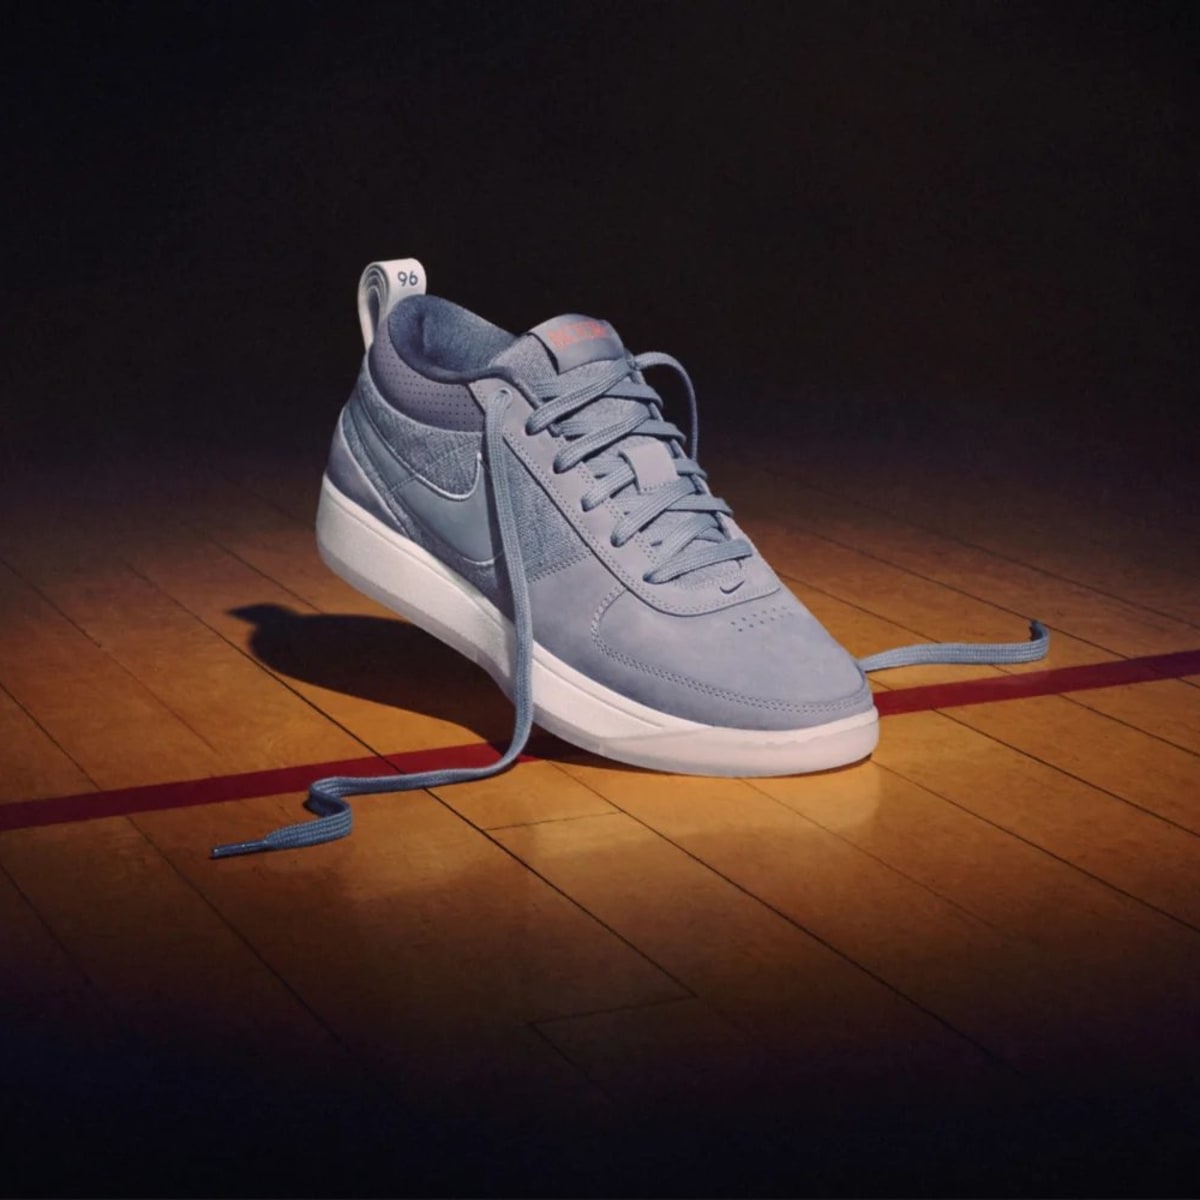 How to Find Devin Booker's Sold-Out Nike Sneakers Online - Sports 